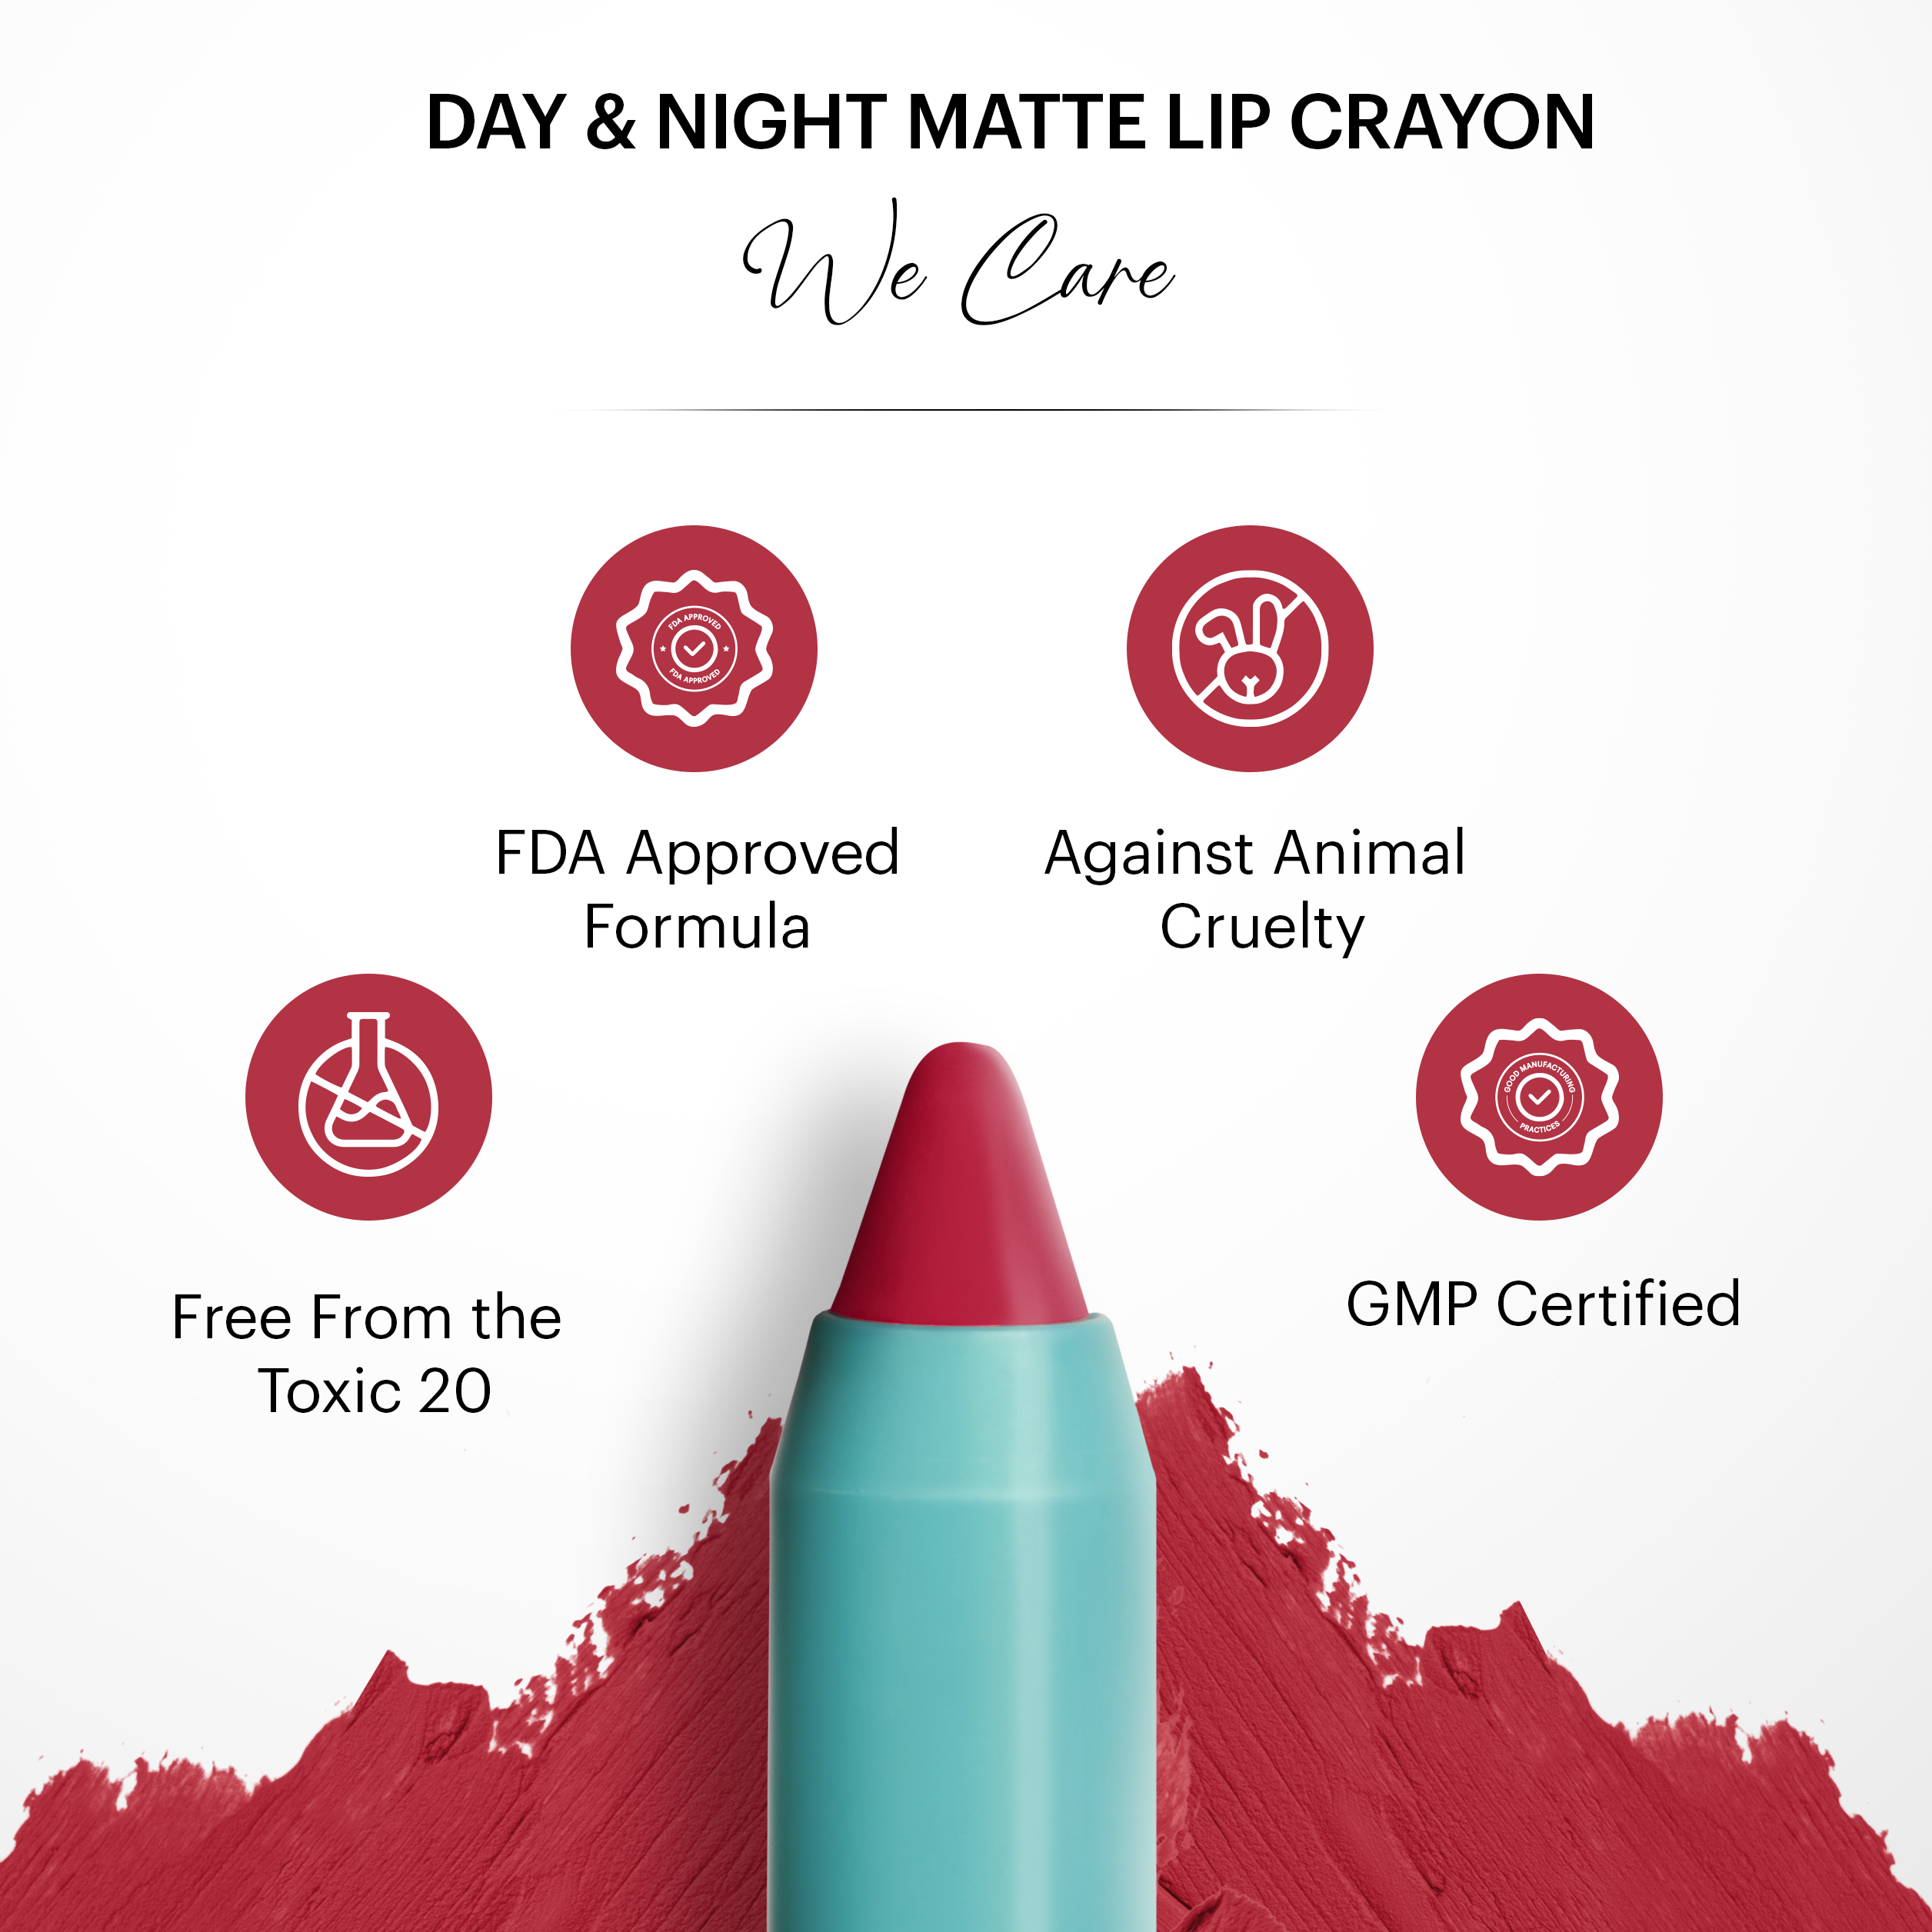 Day & Night Matte Lip Crayon Shade: Prom Queen 23